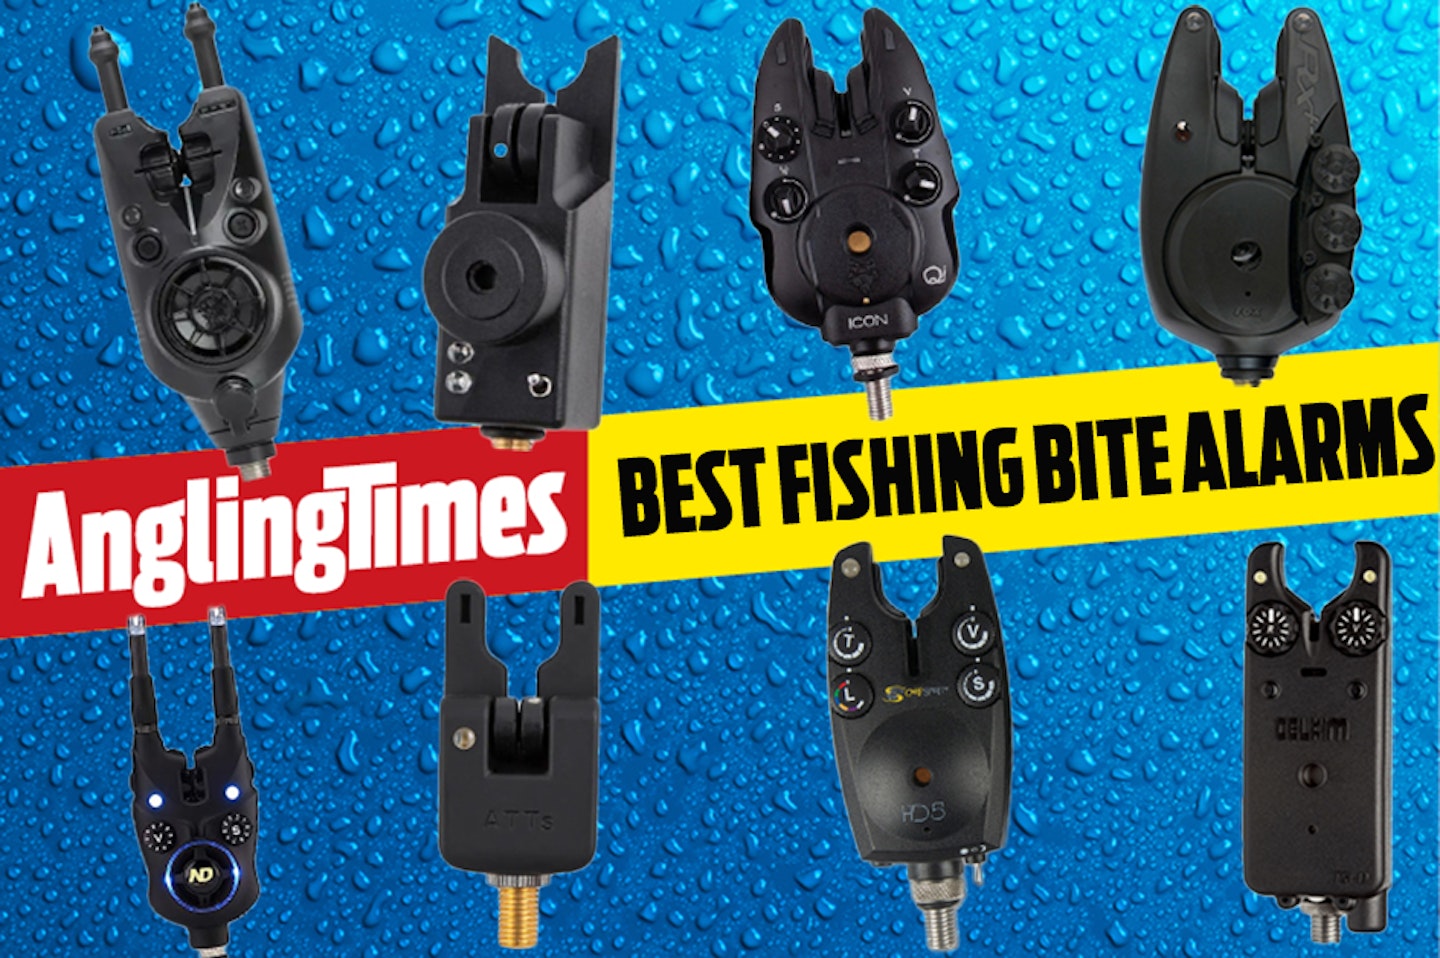 Best Fishing Bite Alarms buying guide